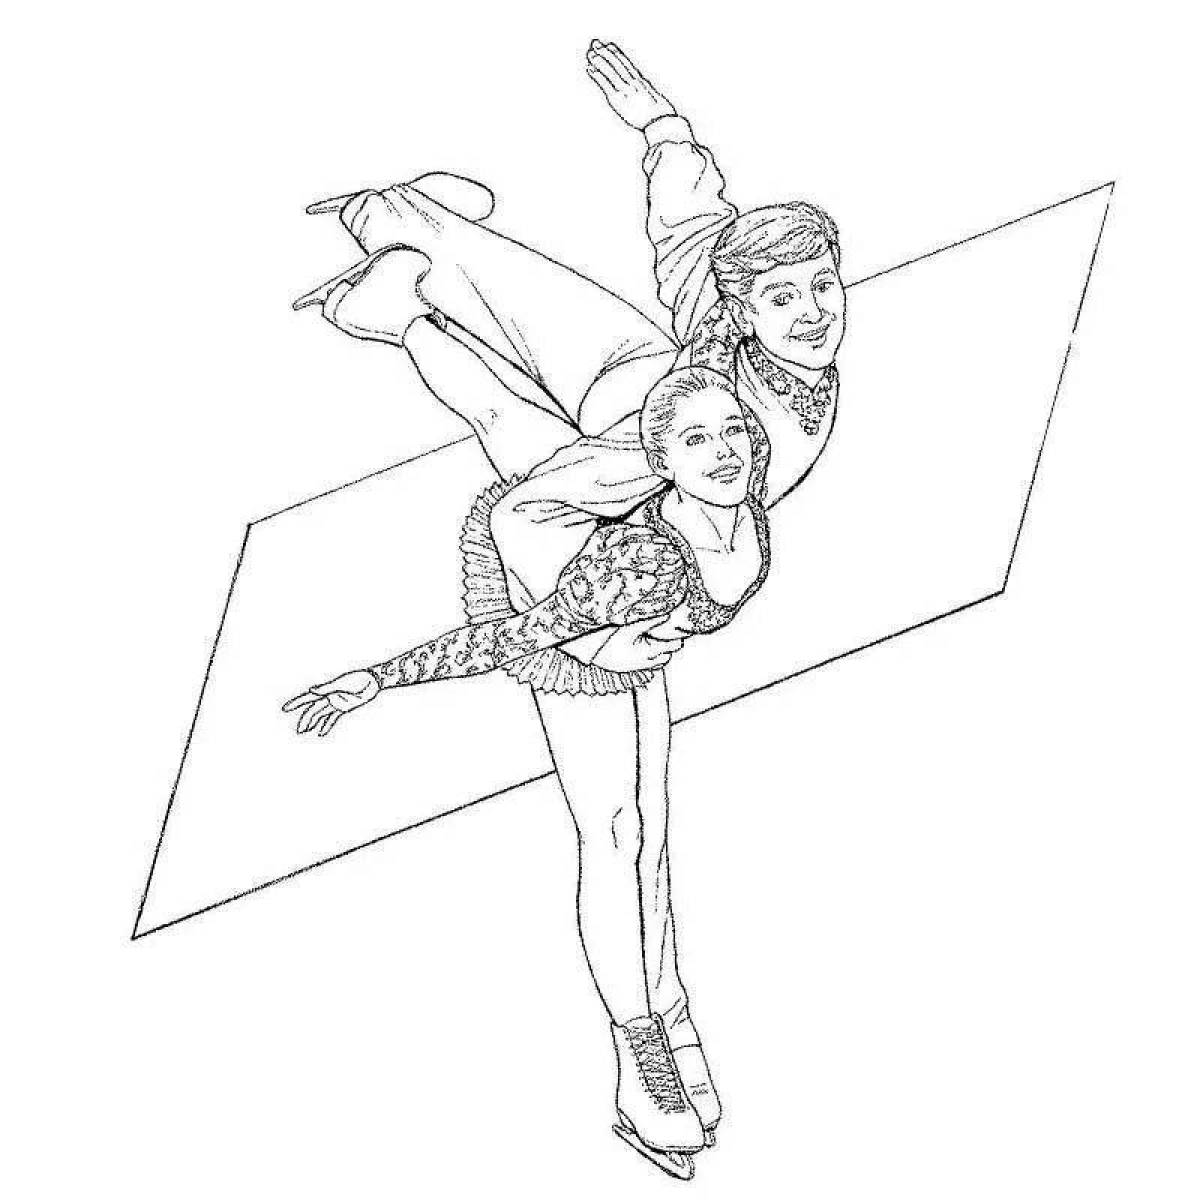 A wonderful figure skater coloring book for kids